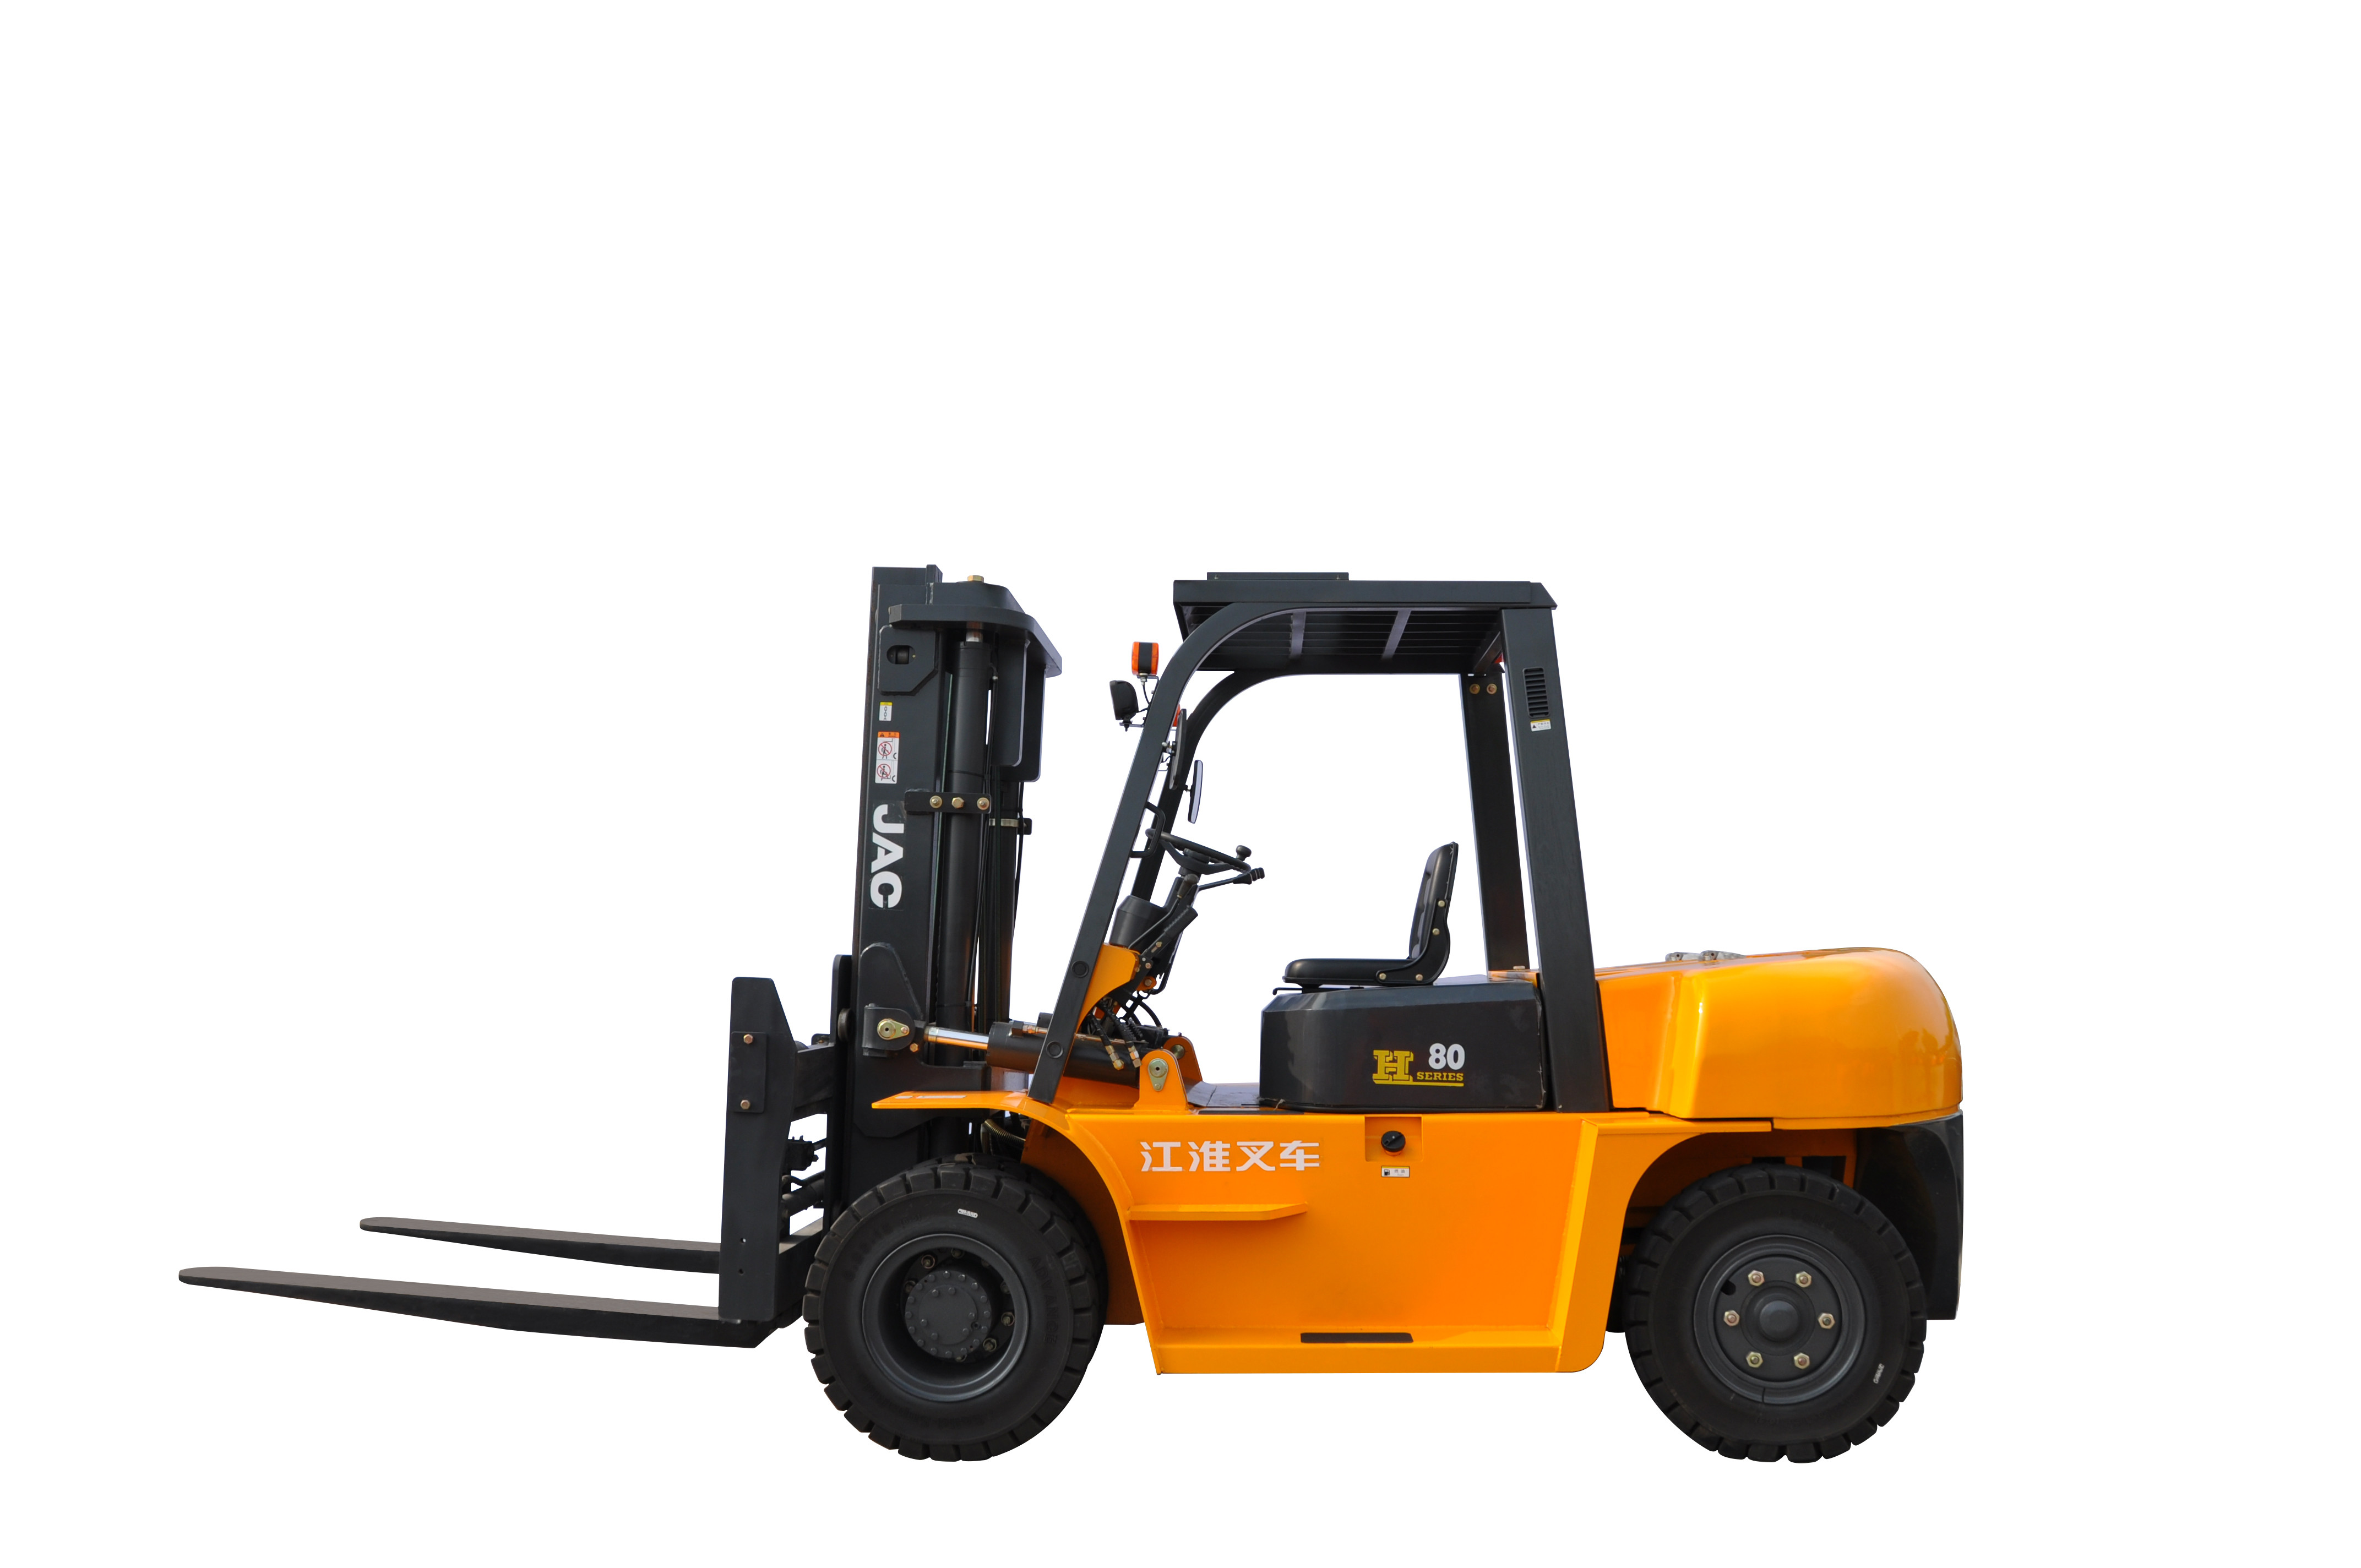  Four Wheel Drive 8 Ton Forklift Diesel Engine With Excellent Manoeuvrability Manufactures